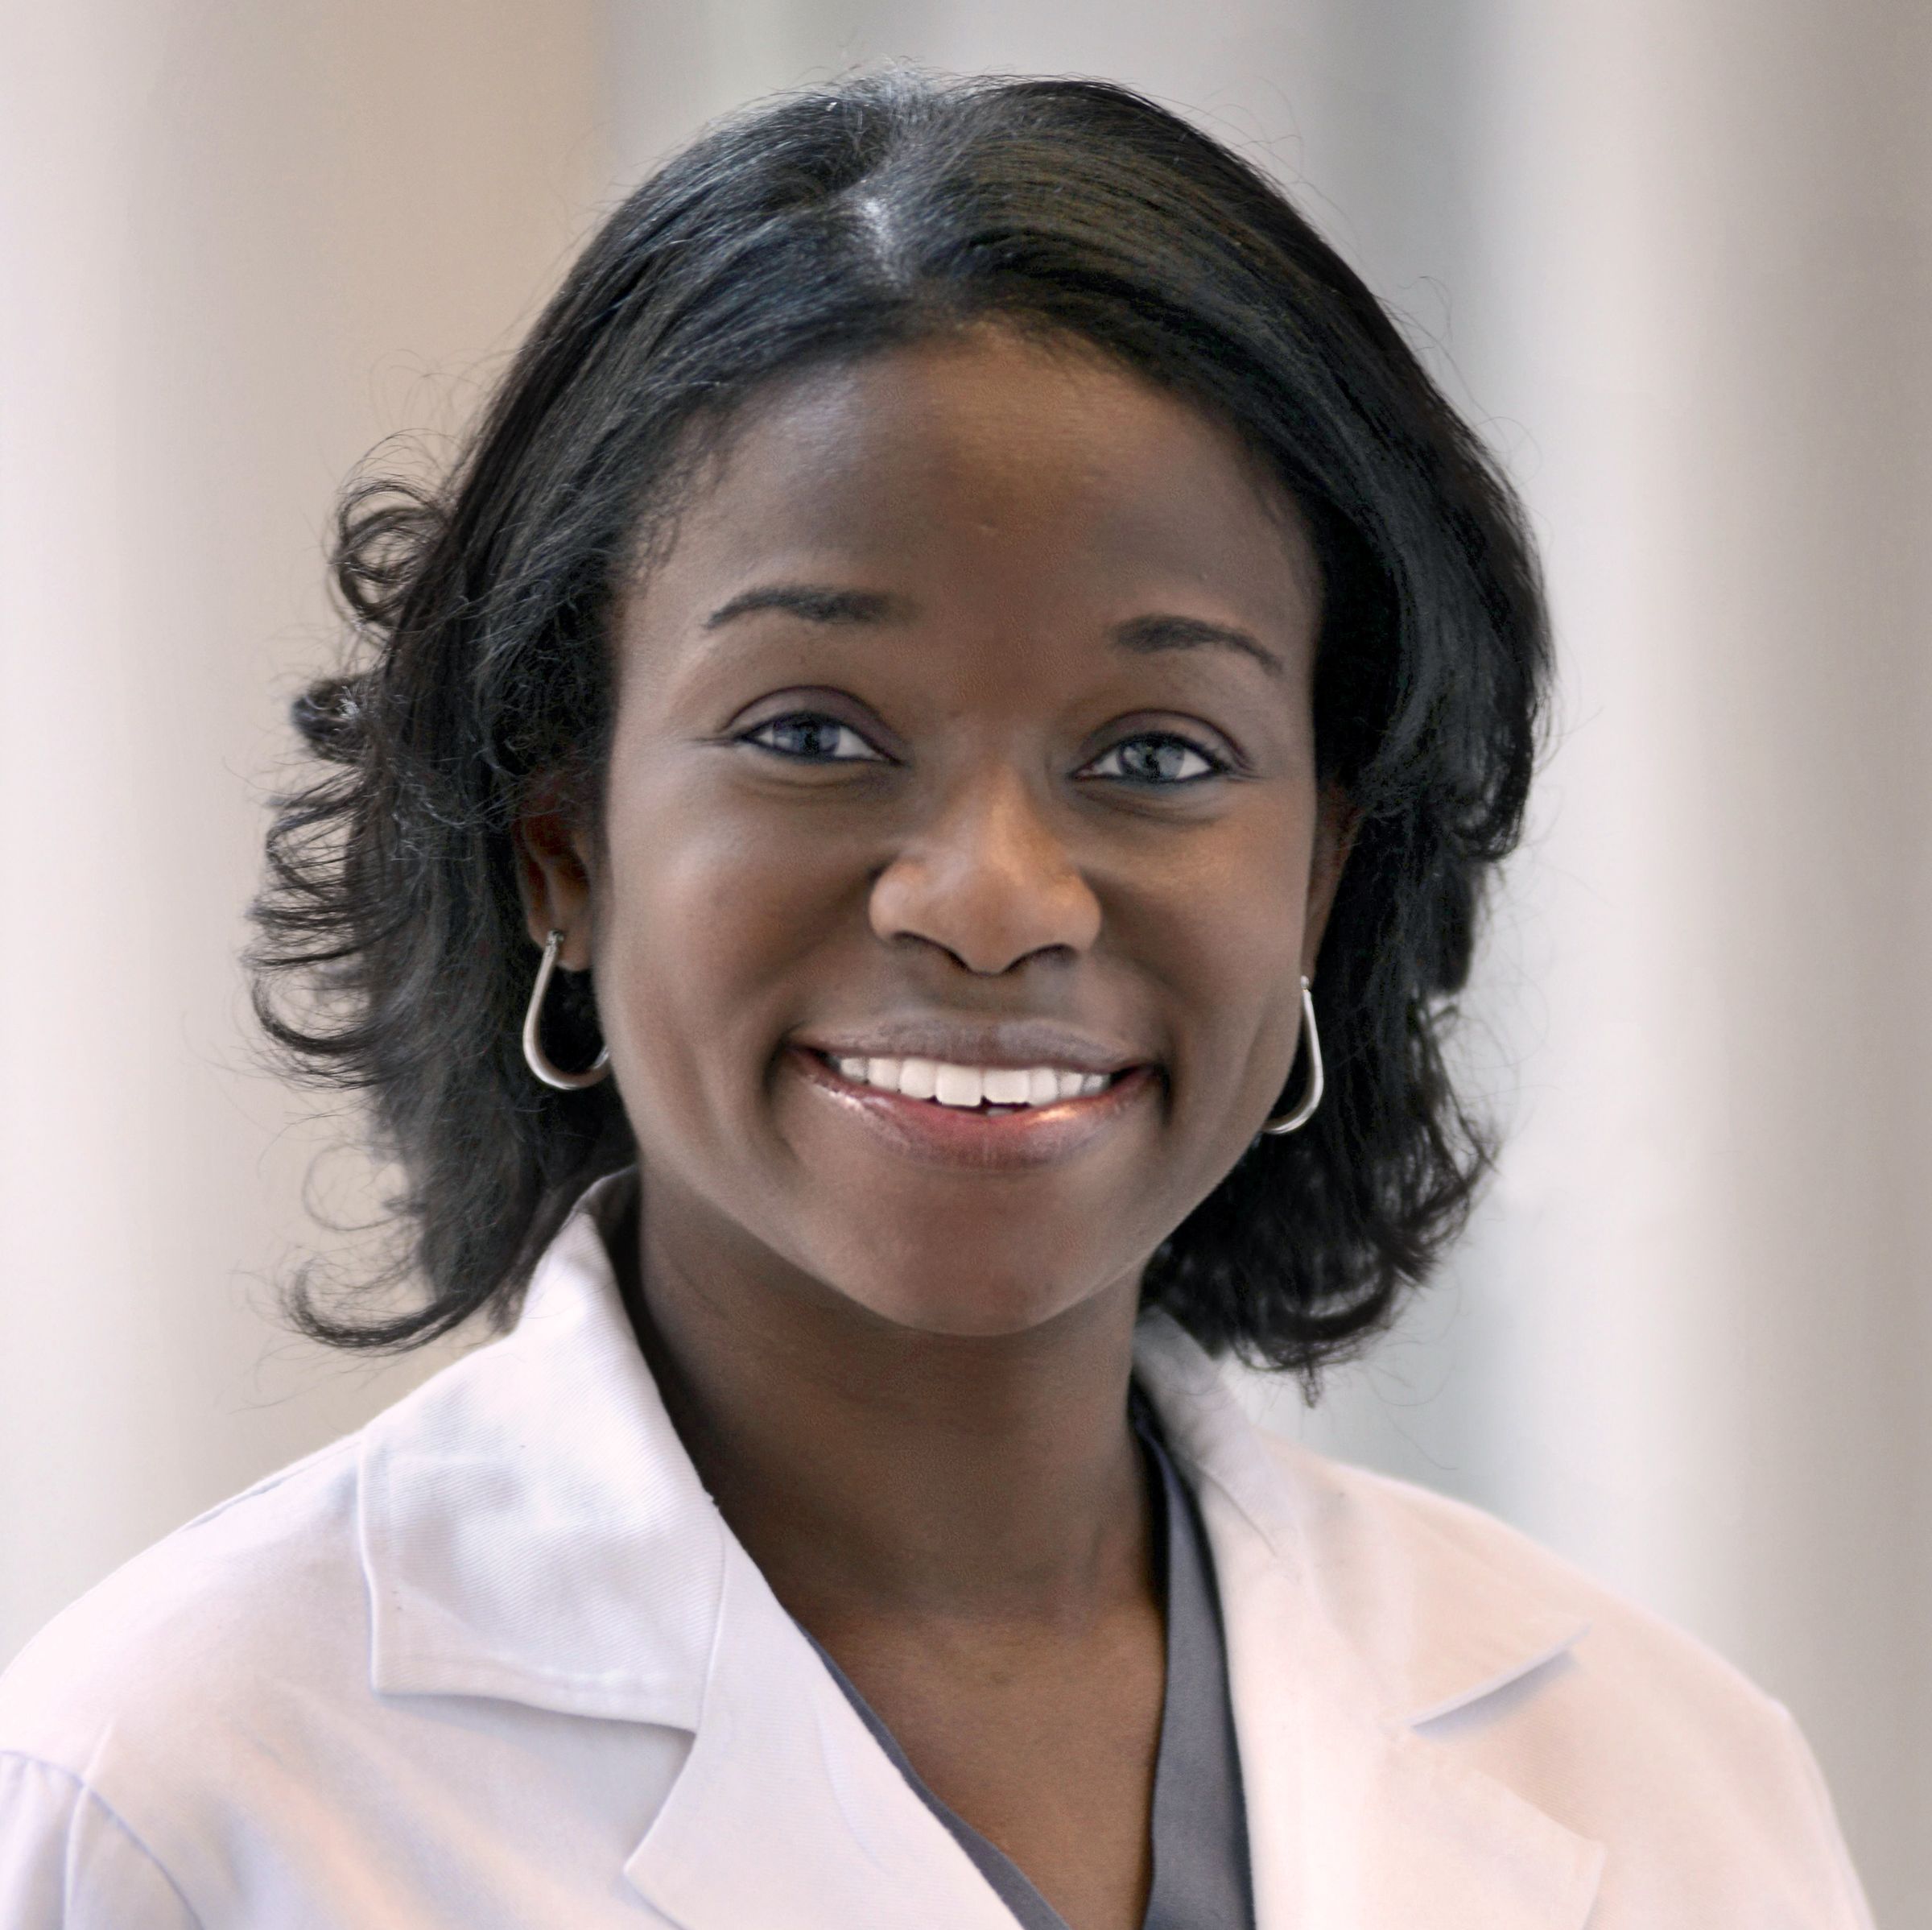 Maame Aba Coleman, M.D., Ed.M